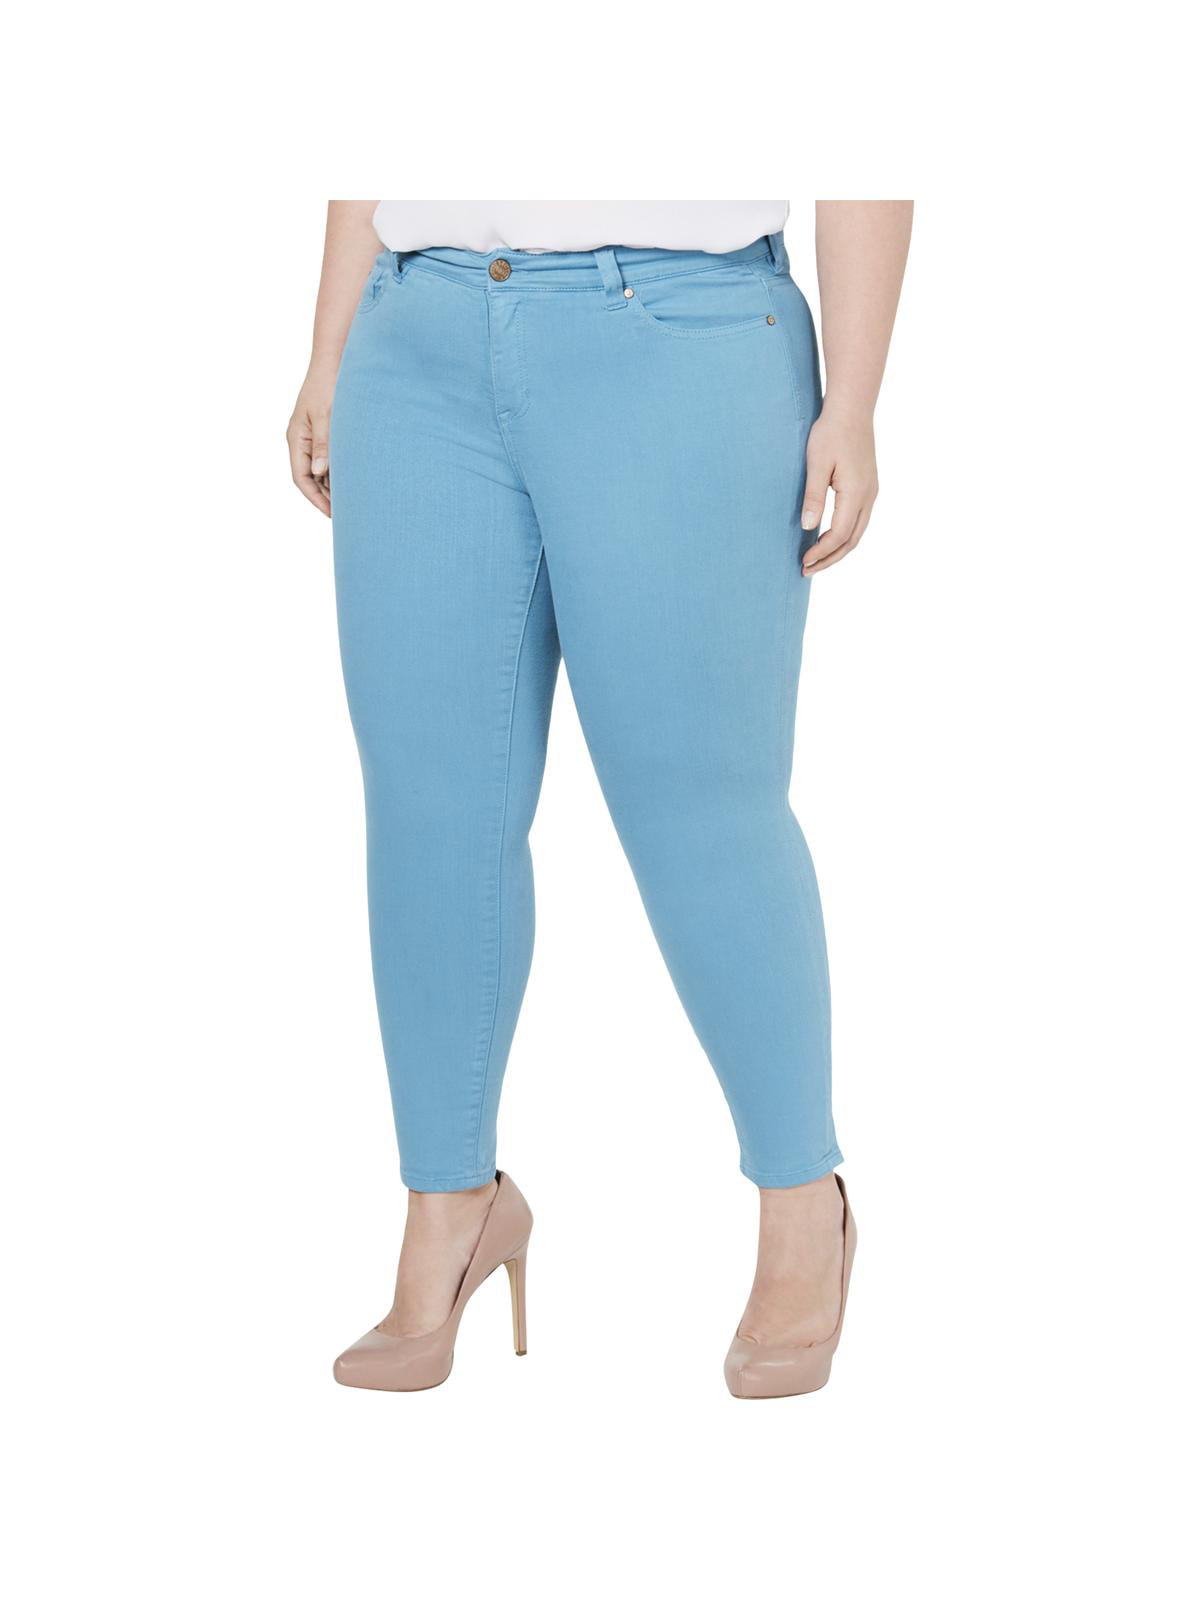 mid rise colored jeans